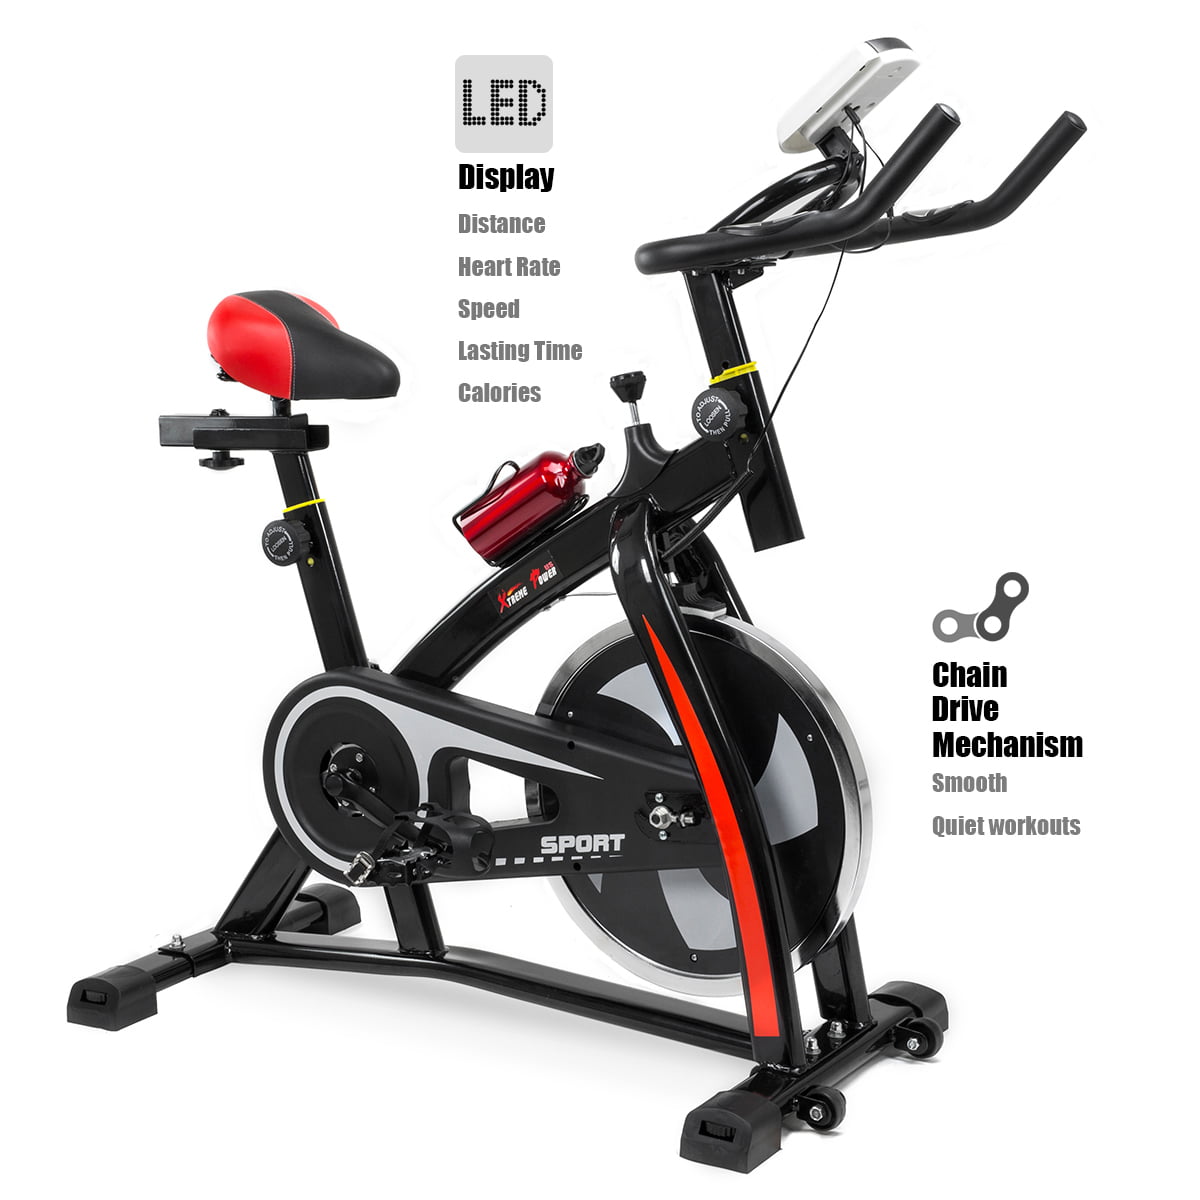 Details about   Stationary Exercise Fitness Bike Cycling Cardio Health Workout Indoor Training 